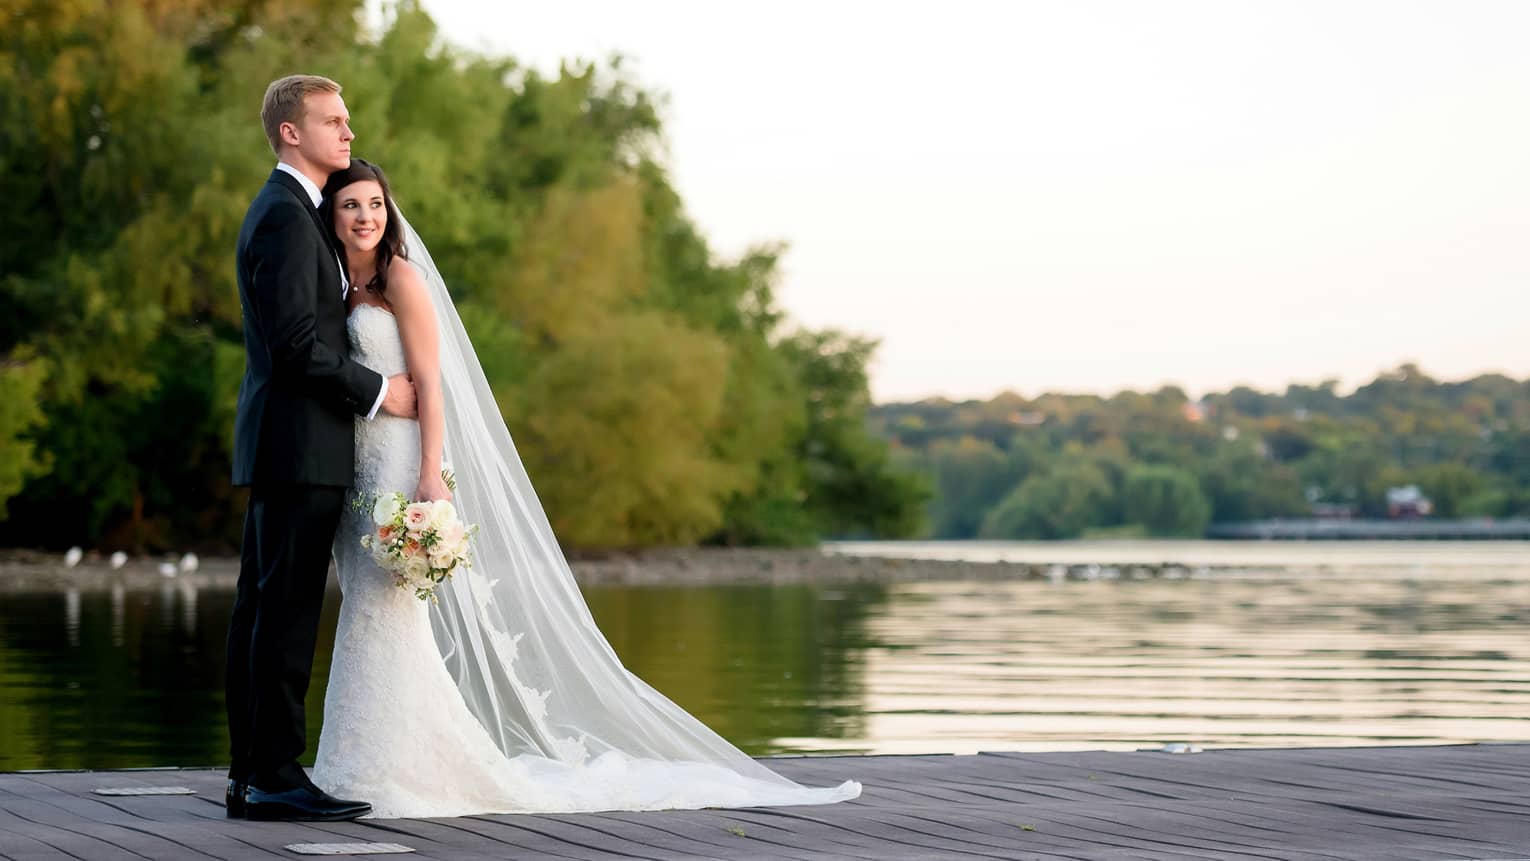 Side view of a bride leaning on groom's chest, as they look out over a body of water surrounded by trees